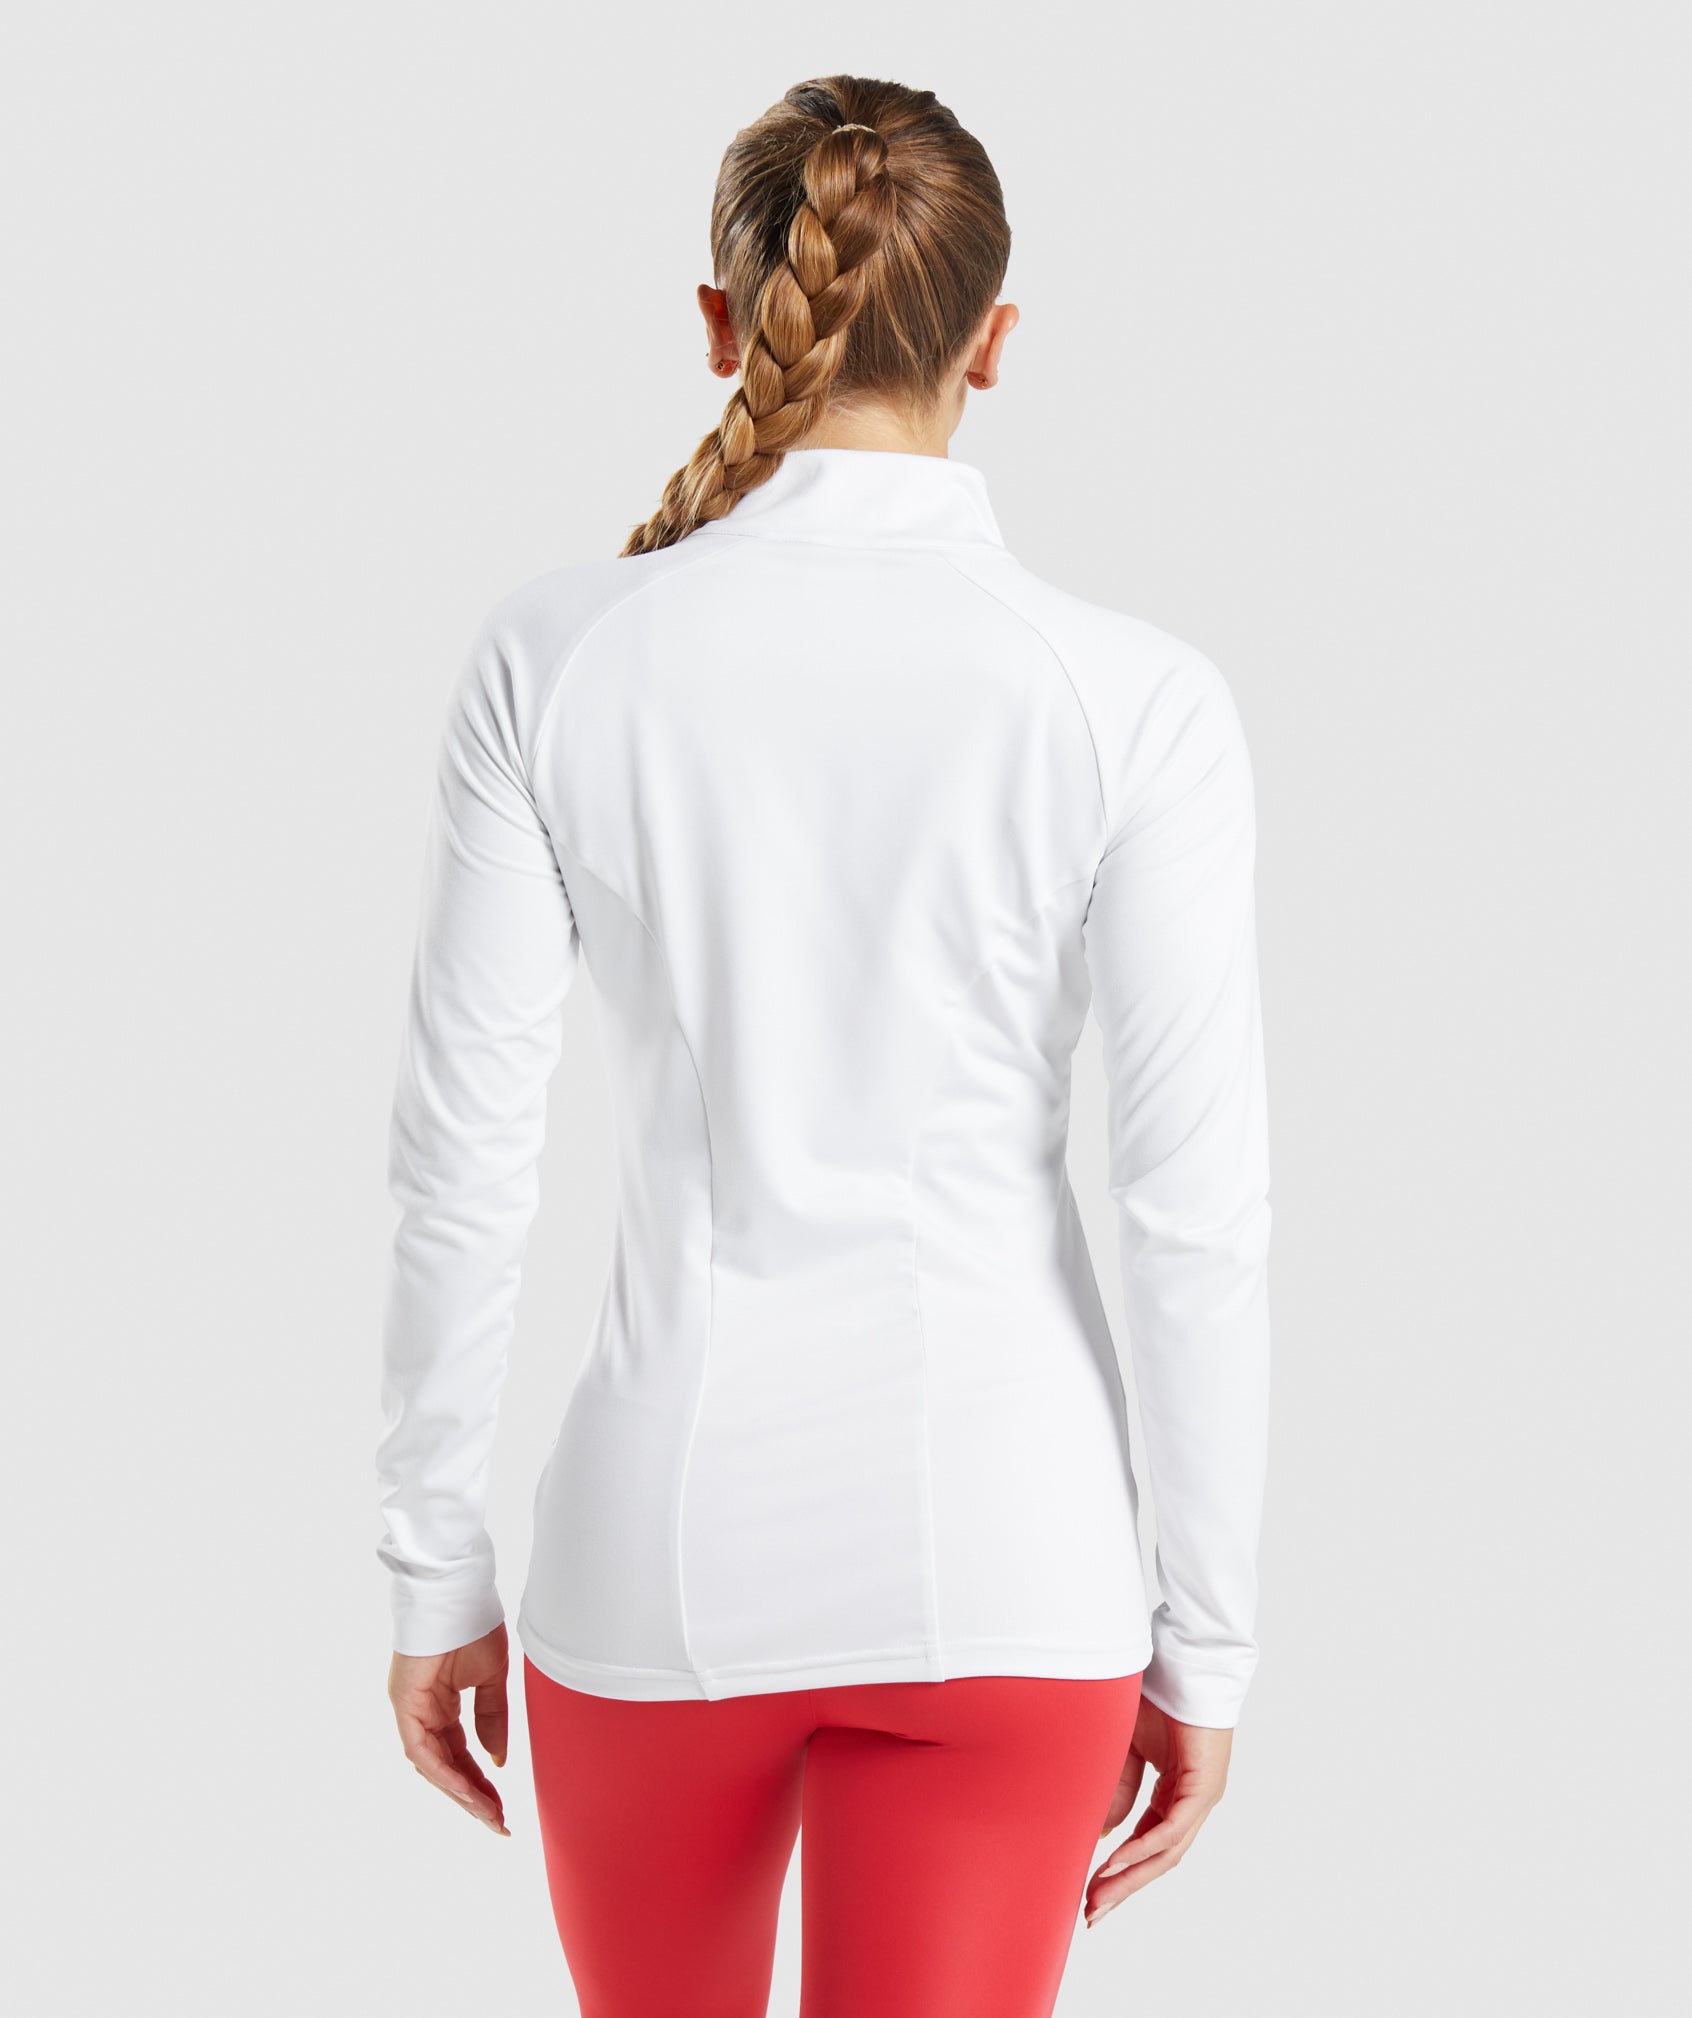 Training Jacket in White - view 2